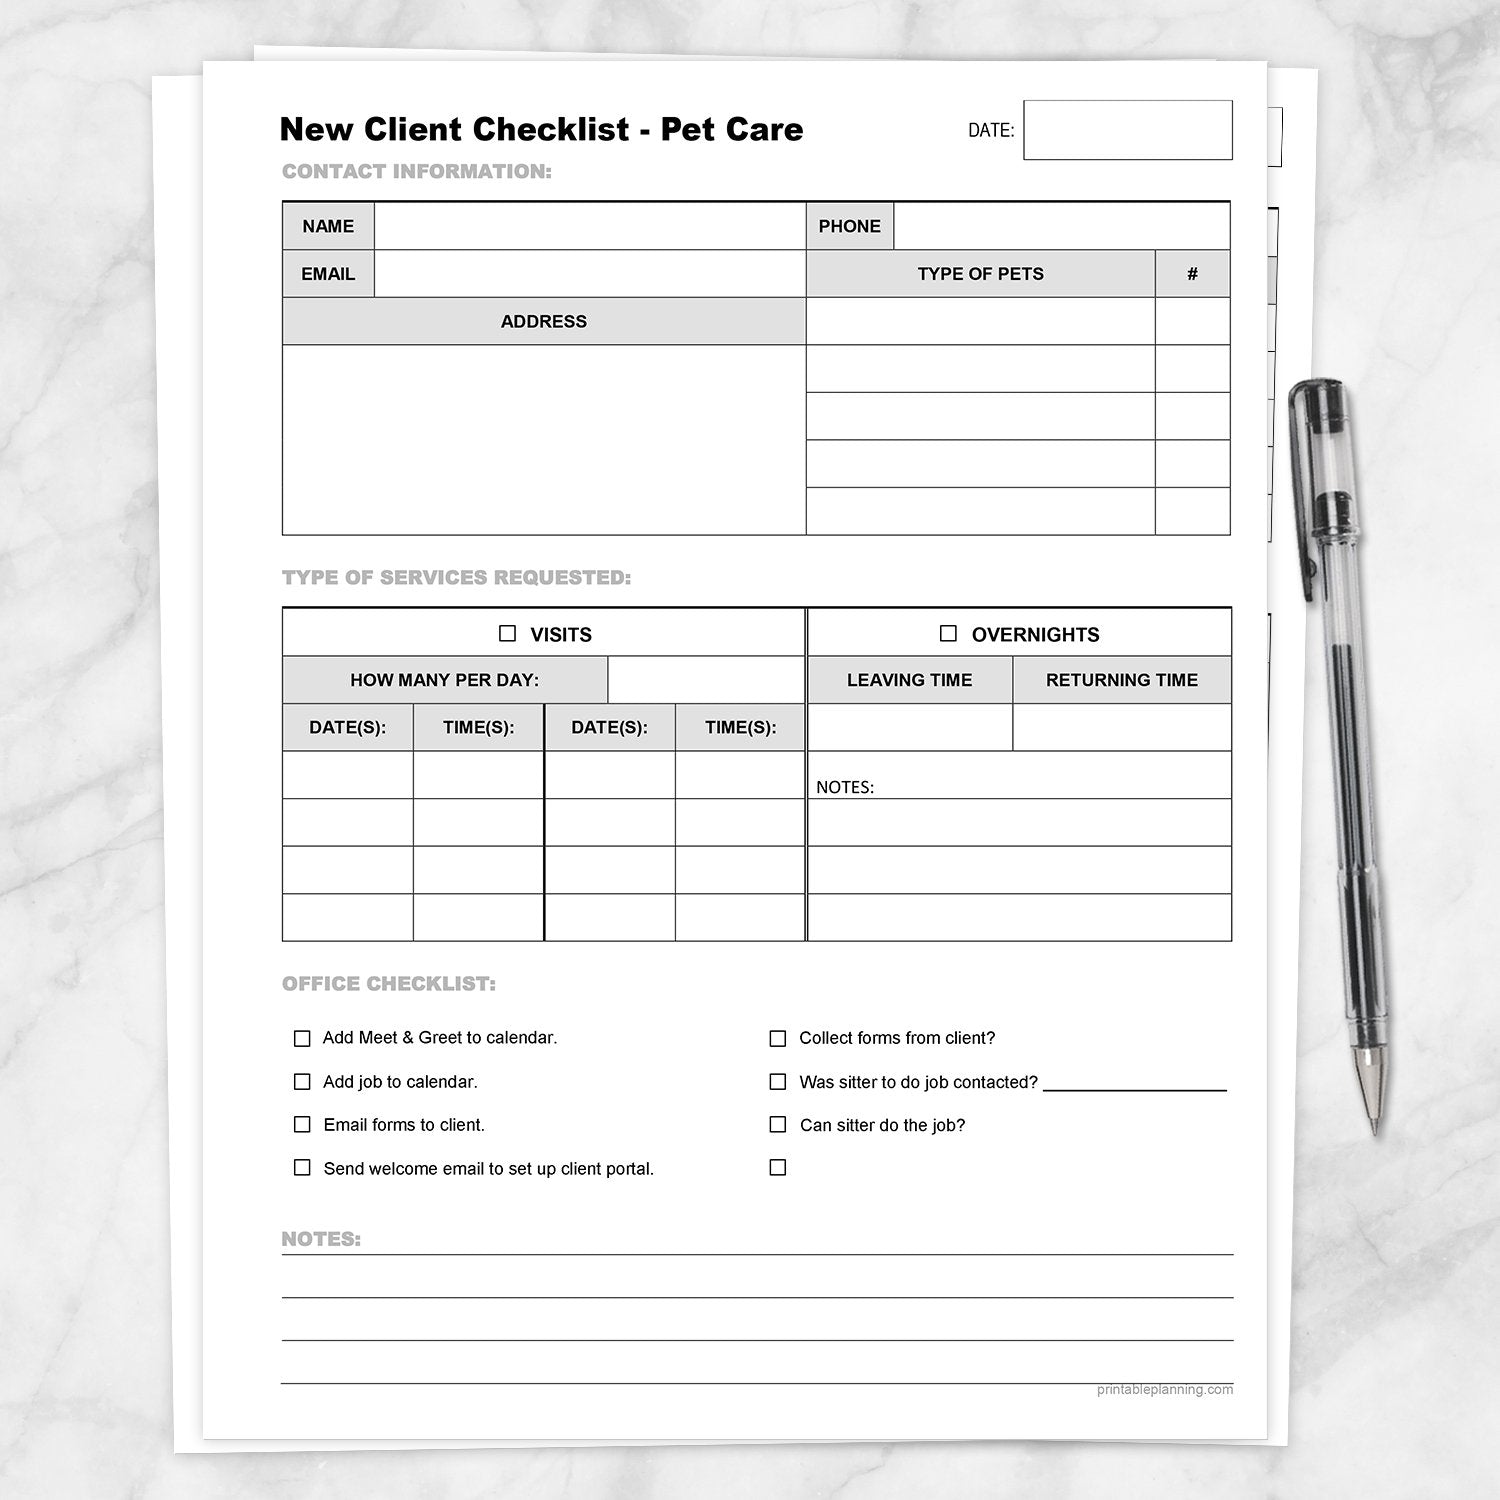 Printable Pet Care - New Client Checklist, Visits and Overnights at Printable Planning